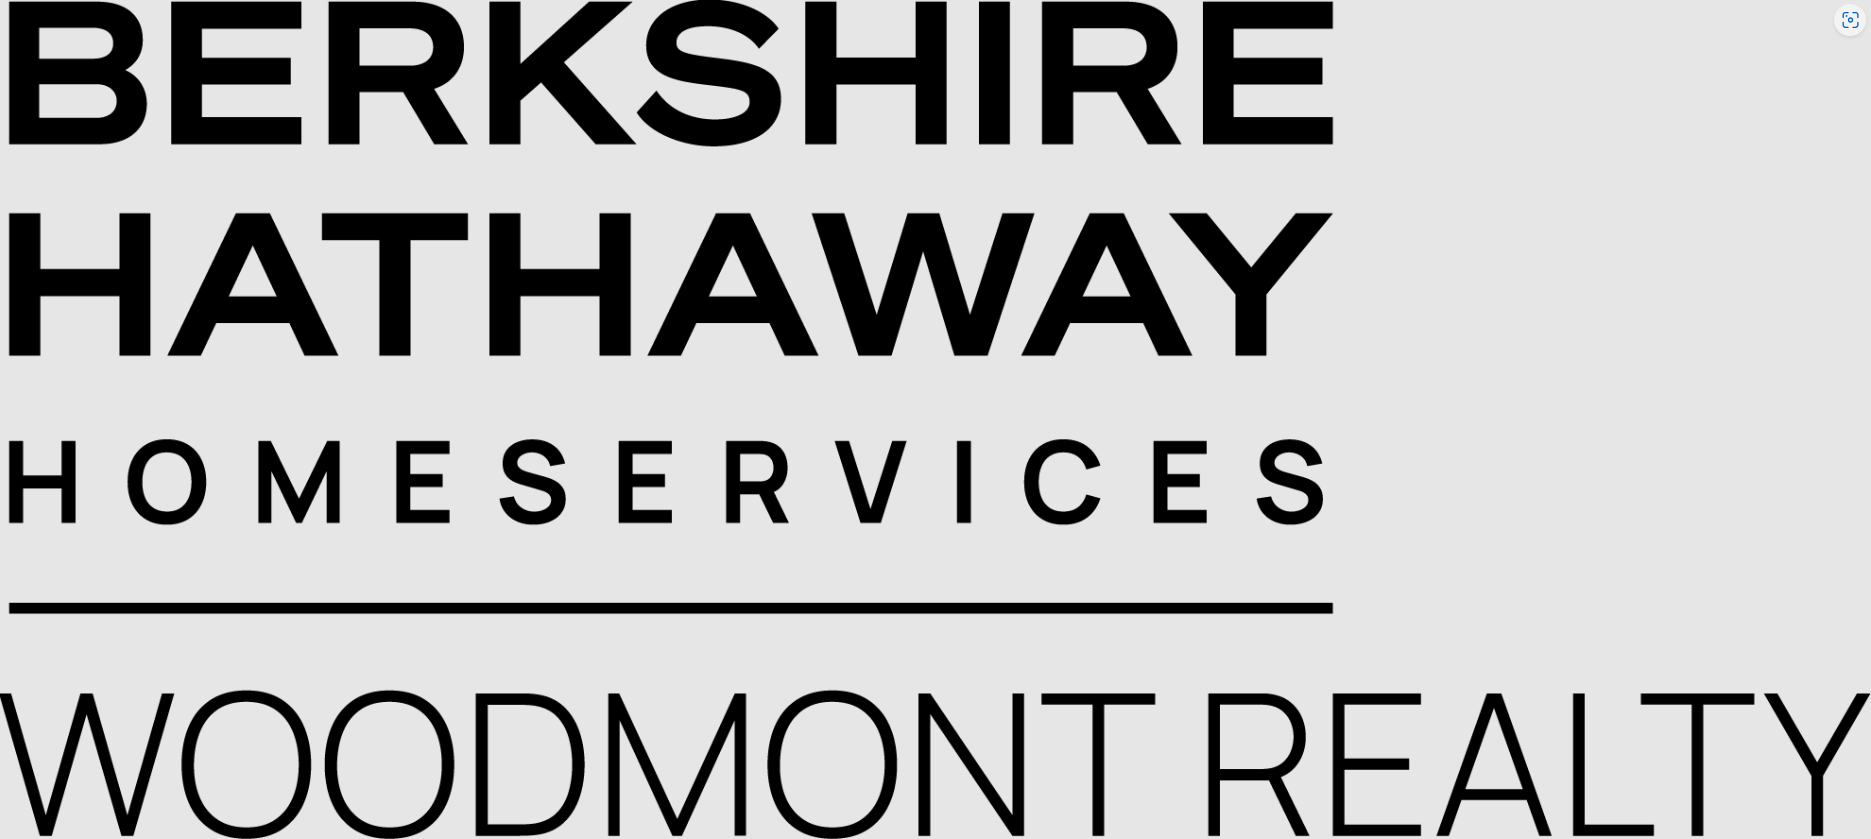 Berkshire Hathaway HomeServices | Woodmont Realty